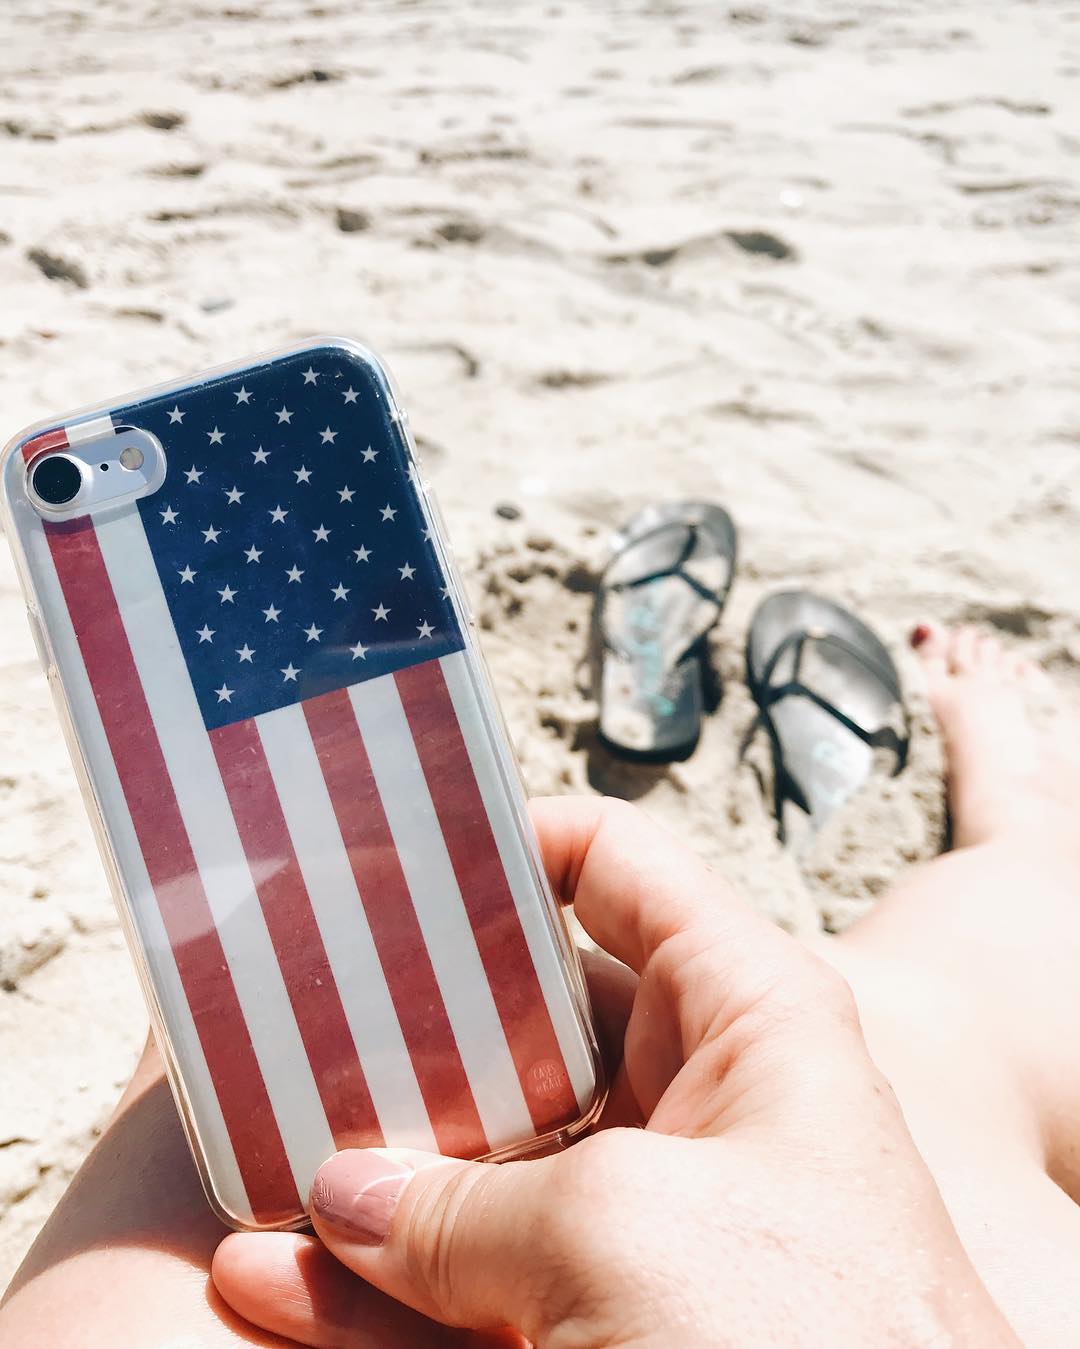 happy fourth from cases by kate hope everyones having a great summer day shop our american flag case on WWWCASESBYKATECOM | Phone Cases